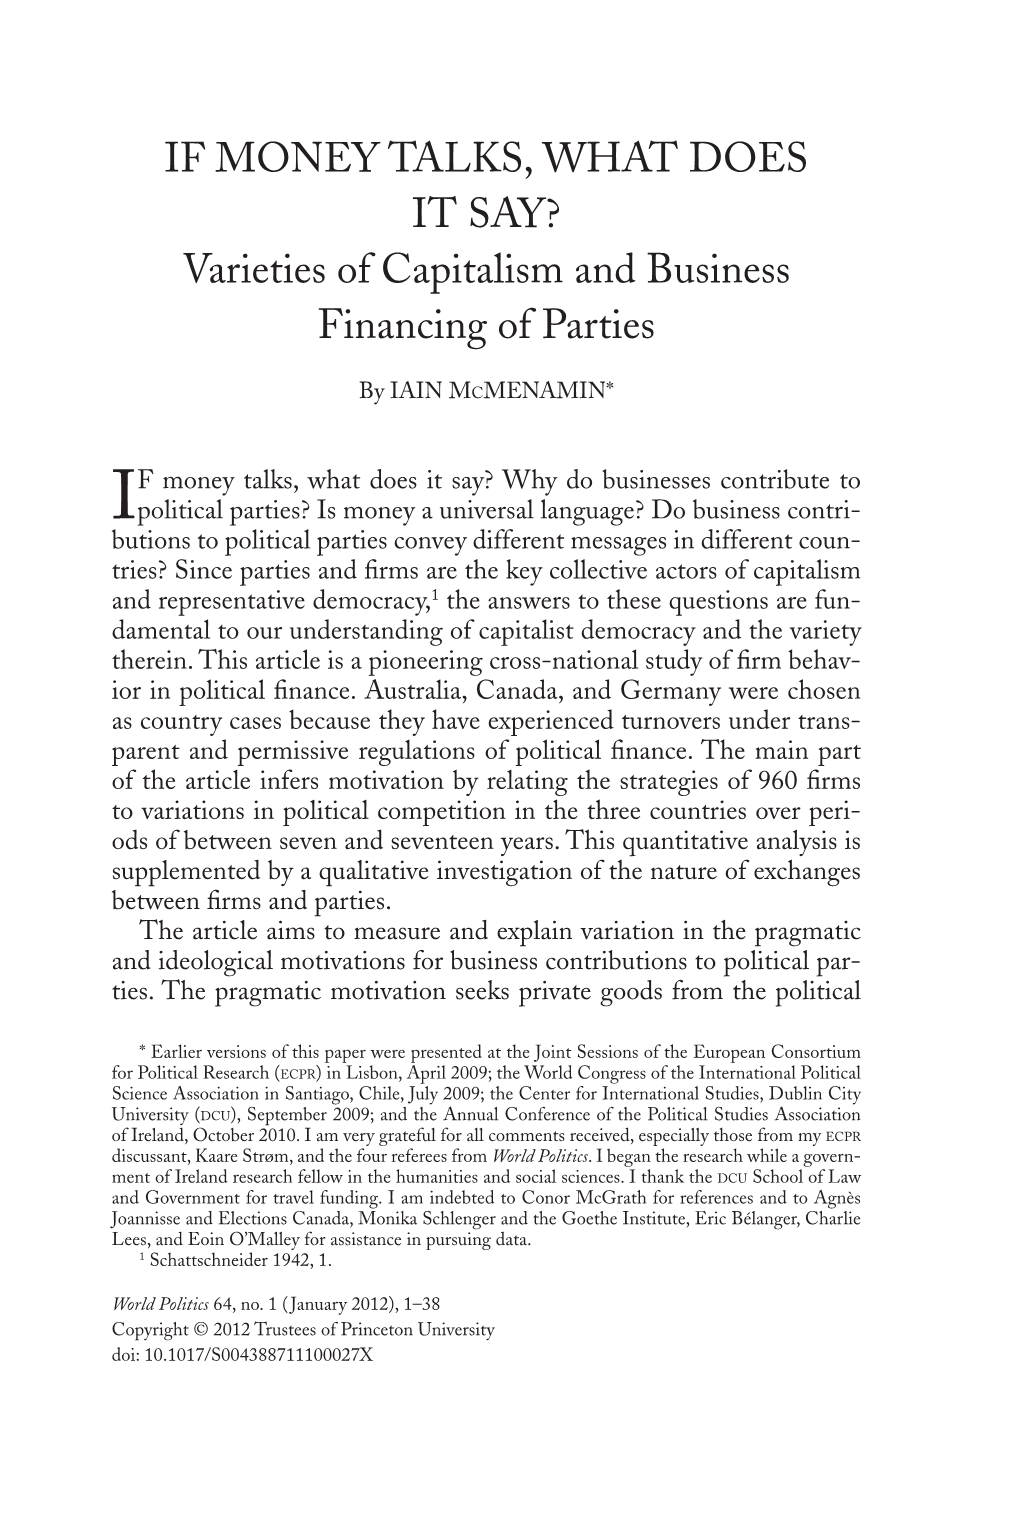 IF MONEY TALKS, WHAT DOES IT SAY? Varieties of Capitalism and Business Financing of Parties